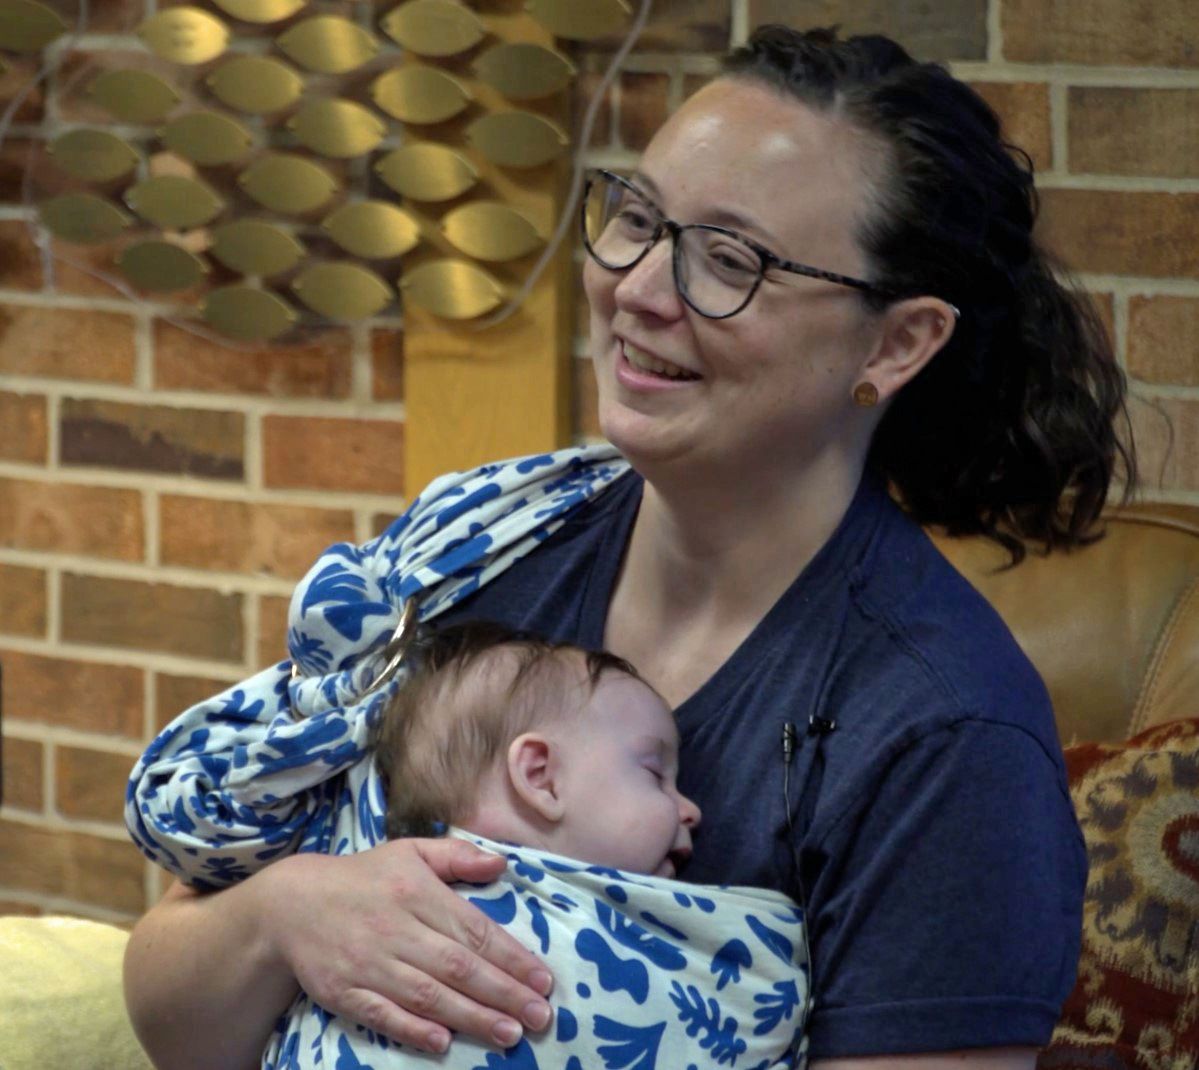 Sioux Falls mothers meet monthly to discuss their experiences giving birth via caesarean section